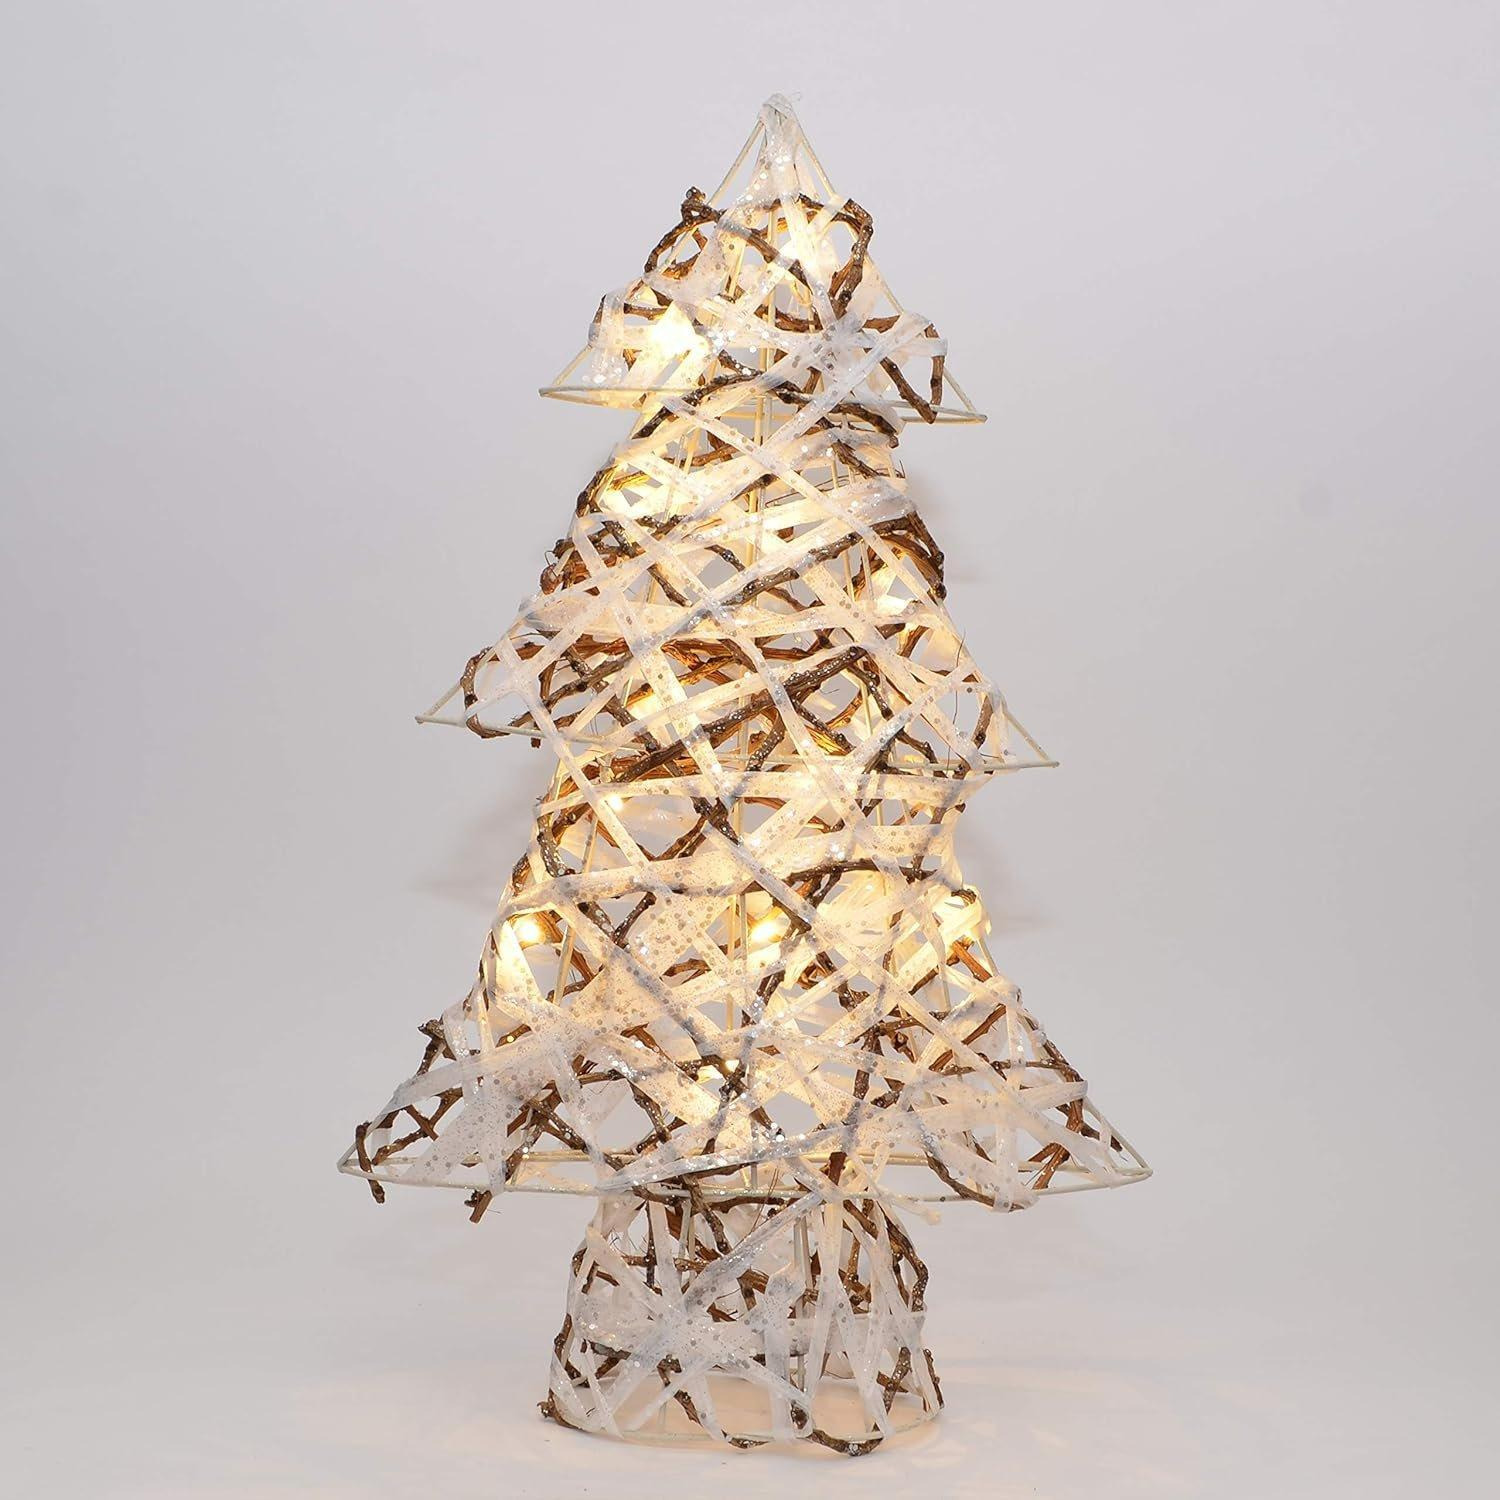 Pre-Lit Tabletop Centrepieces Snowman/Tree/Reindeer Twig Rattan with Warm White LEDs Christmas Holiday Decoration - image 1